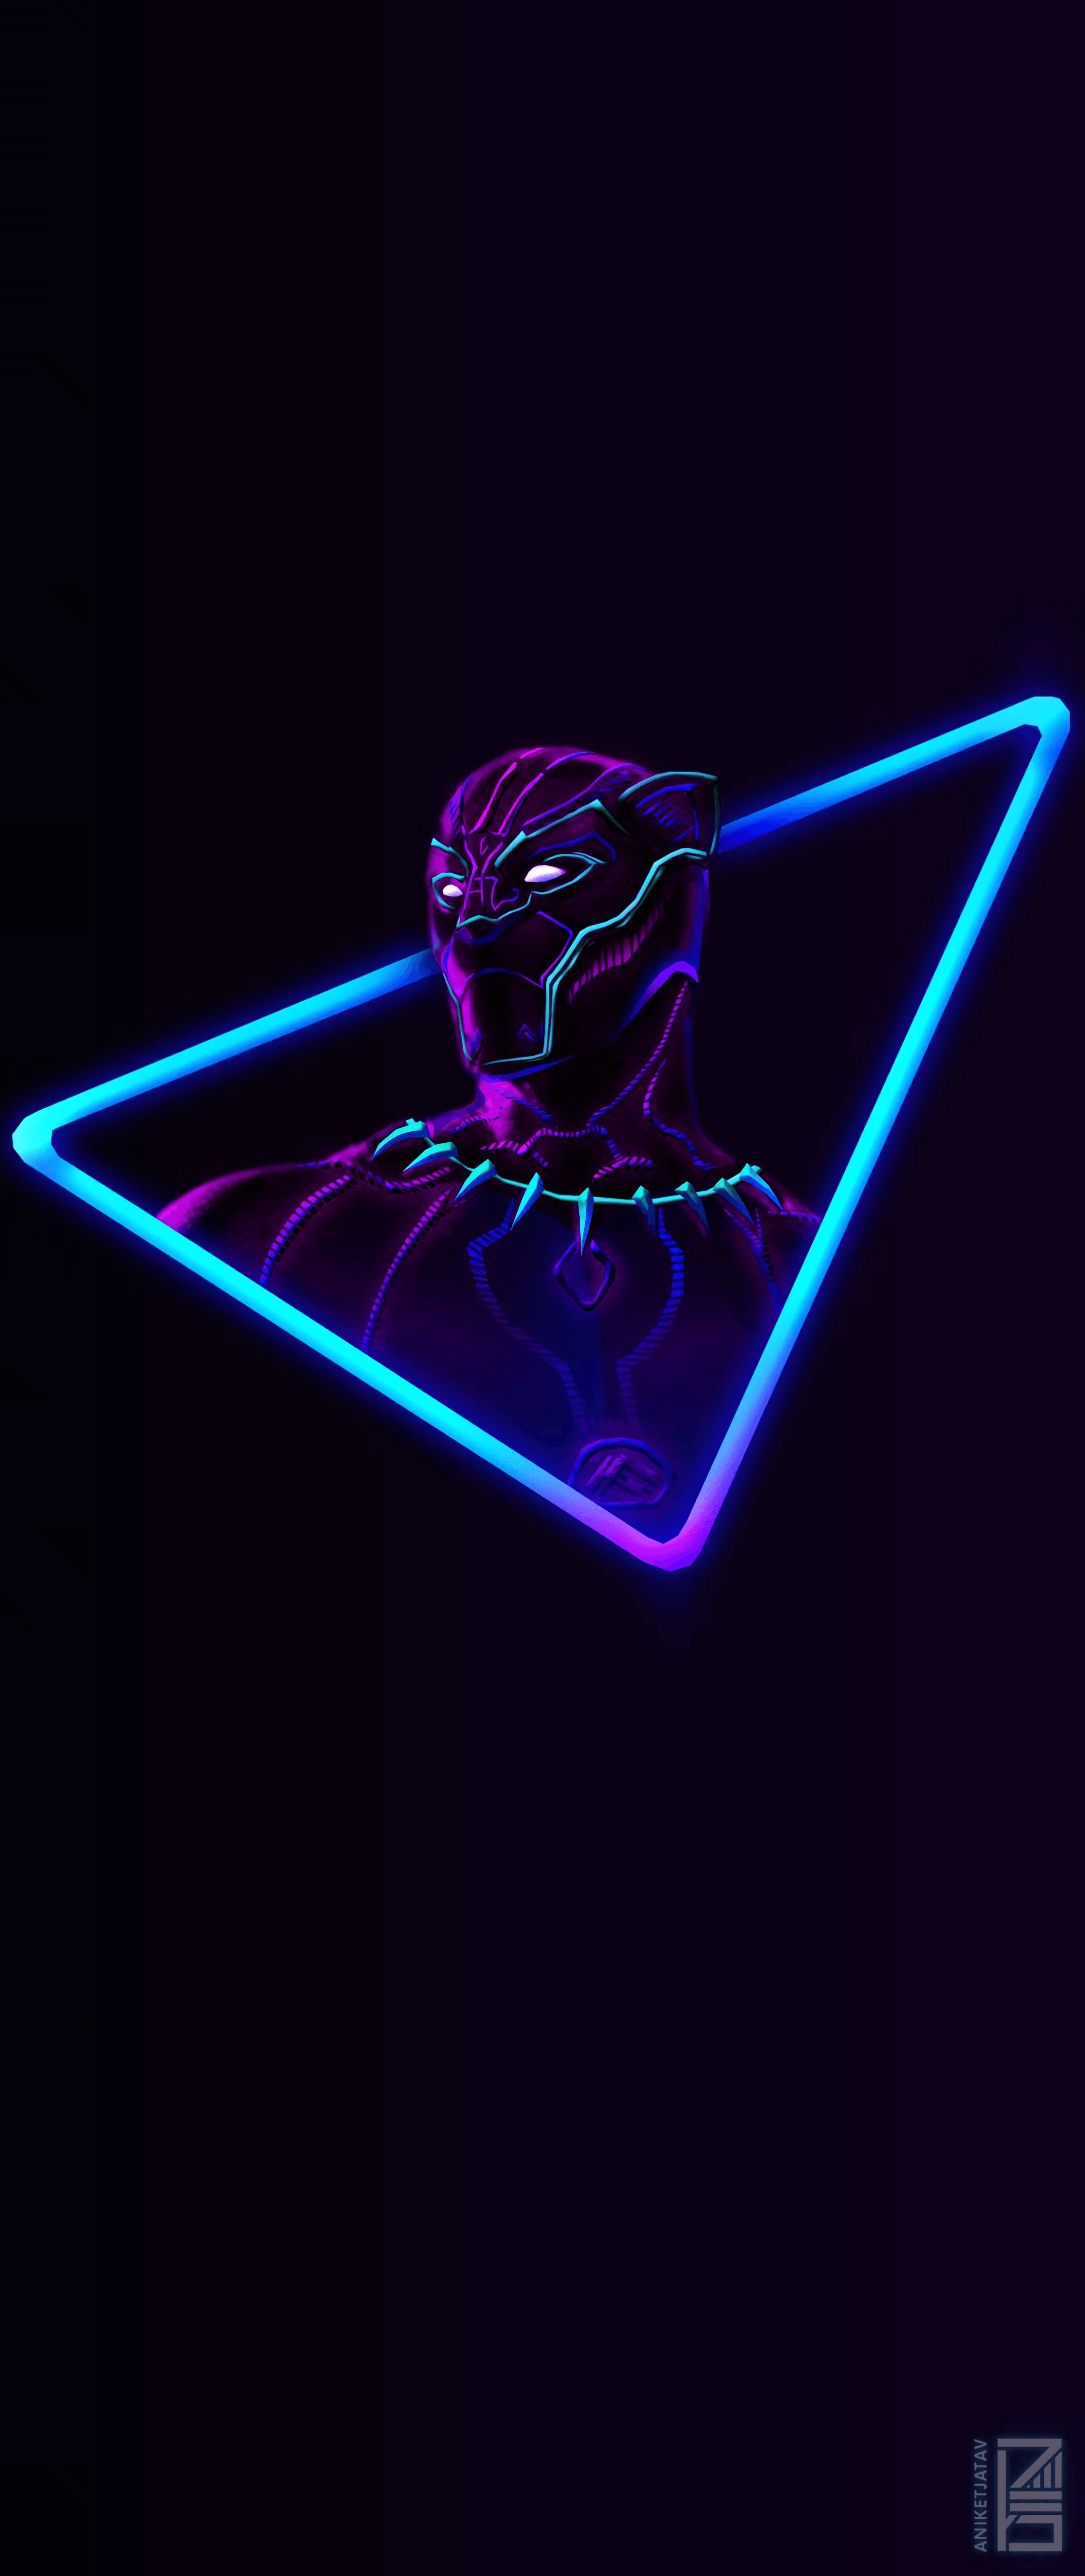 Wallpaper For Mobile Black Panther